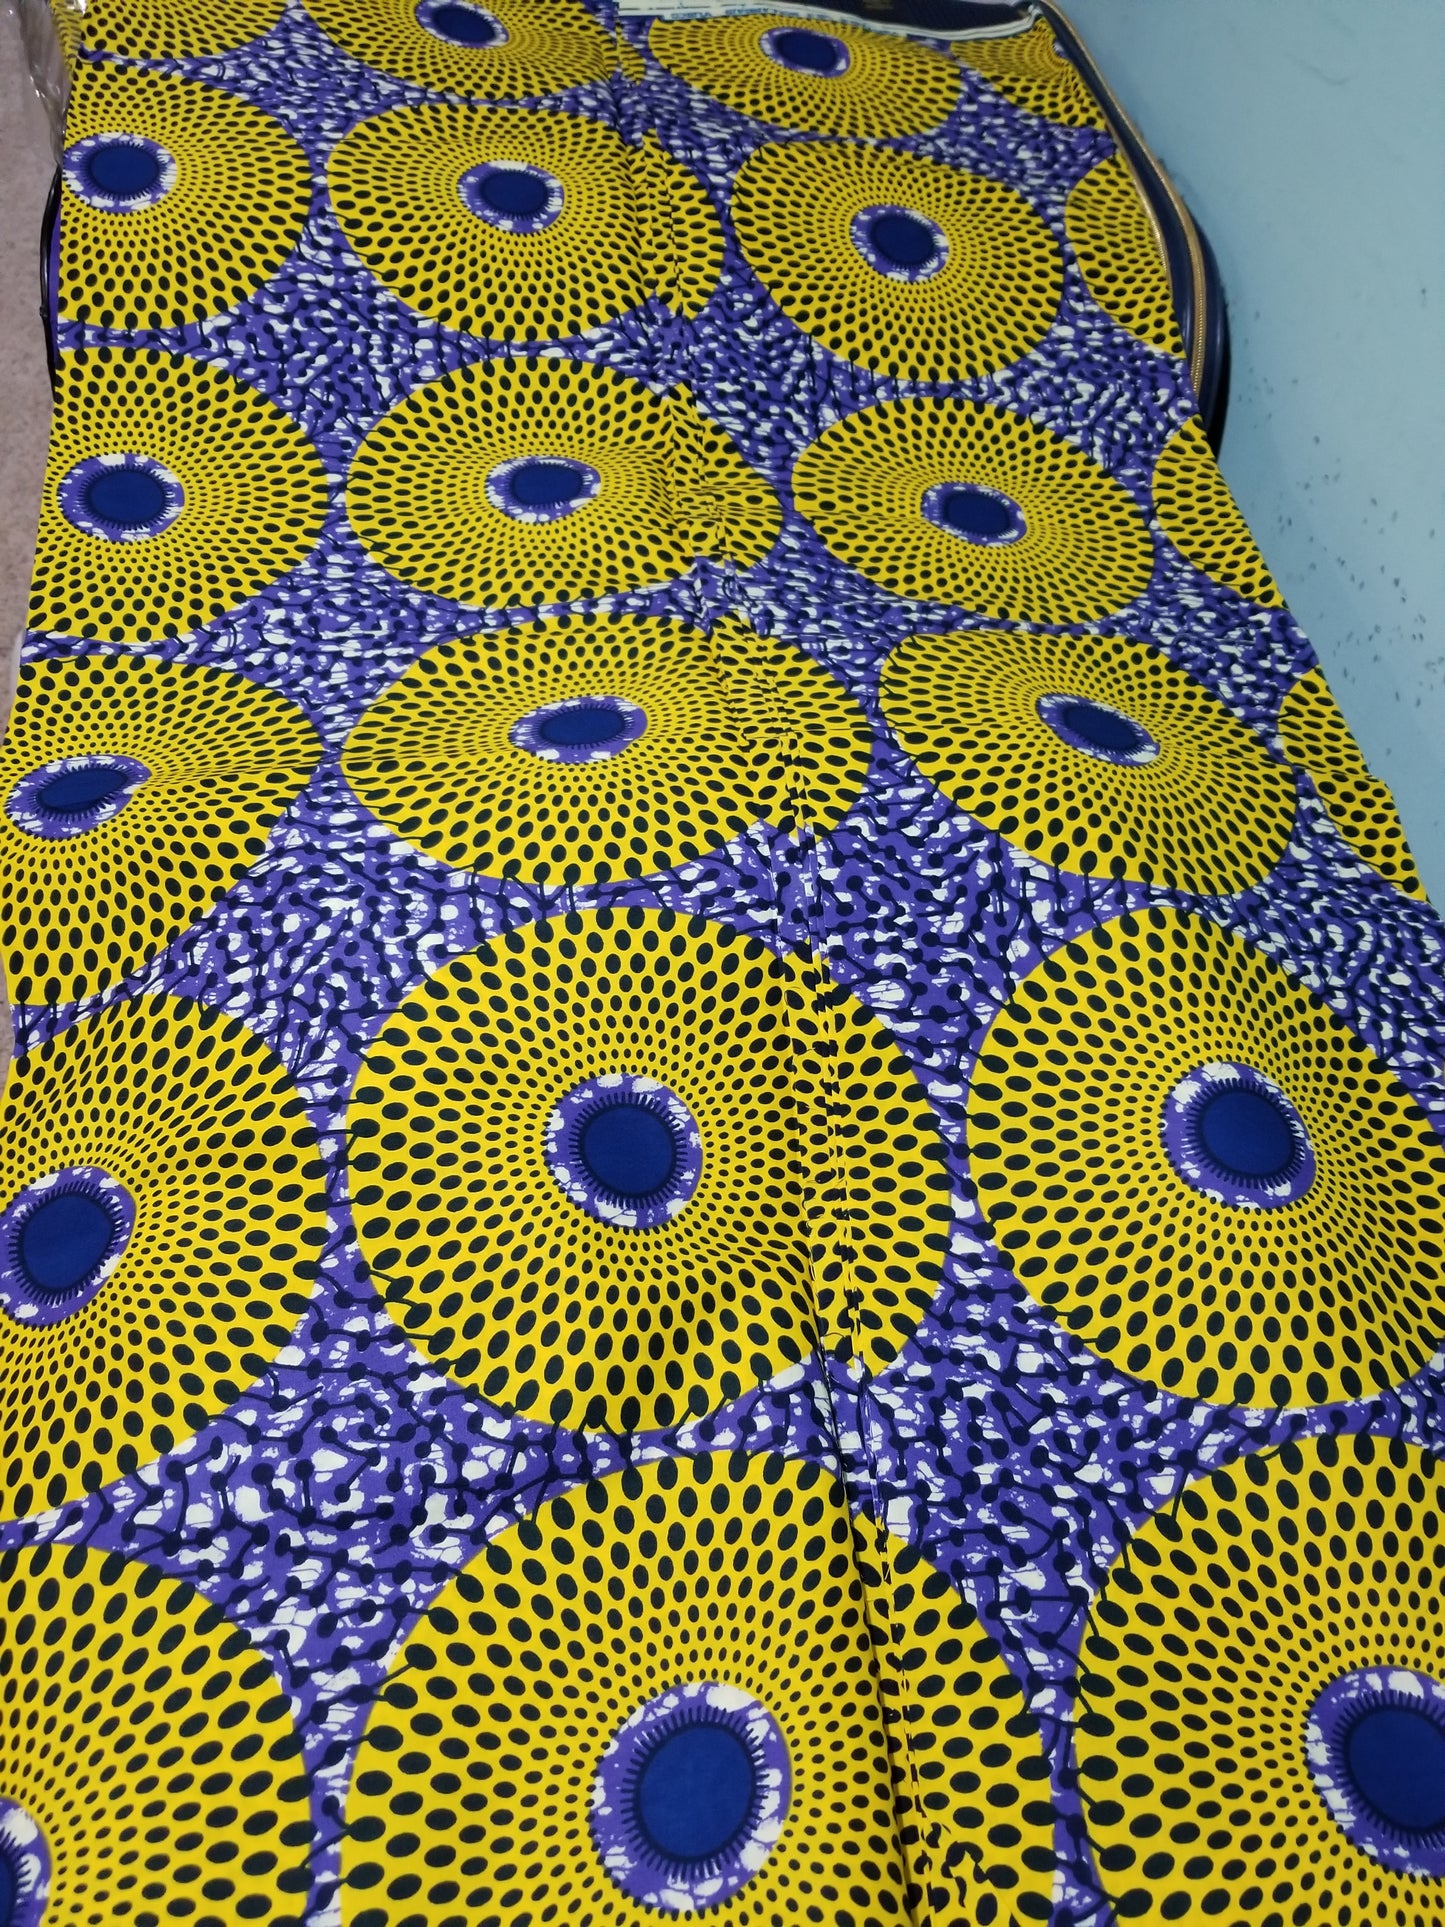 Veritable African wax print fabric. Sold per 6yds. Price is for 6yds soft texture, excellent quality